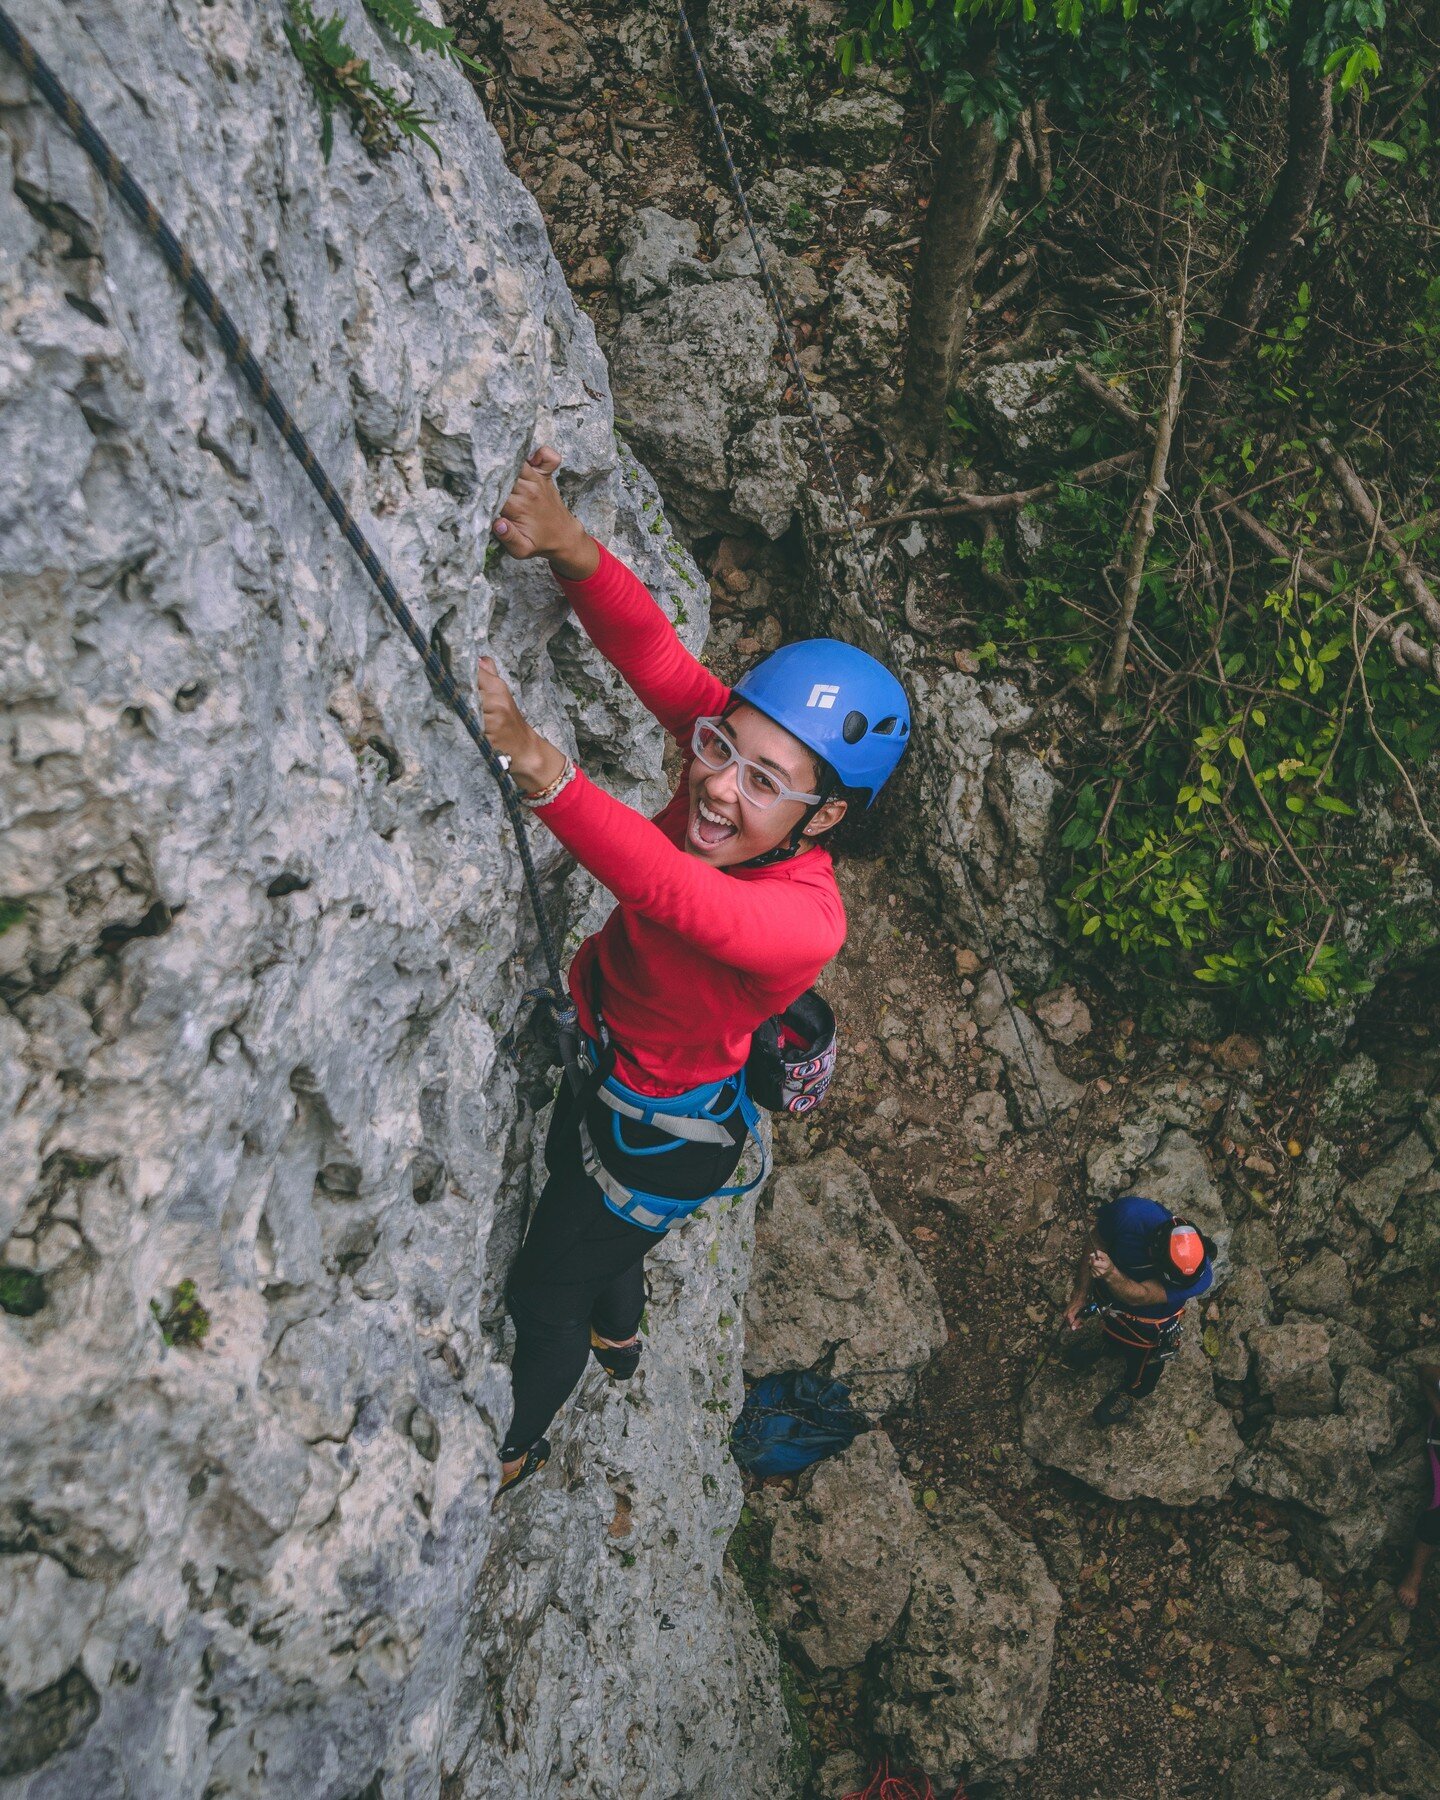 Take a break from your daily routine and immerse yourself in nature.
Feel the thrill of the rock beneath your fingertips, the rush of the wind in your hair, and the sense of accomplishment as you reach new summits. Whether you're a seasoned climber o